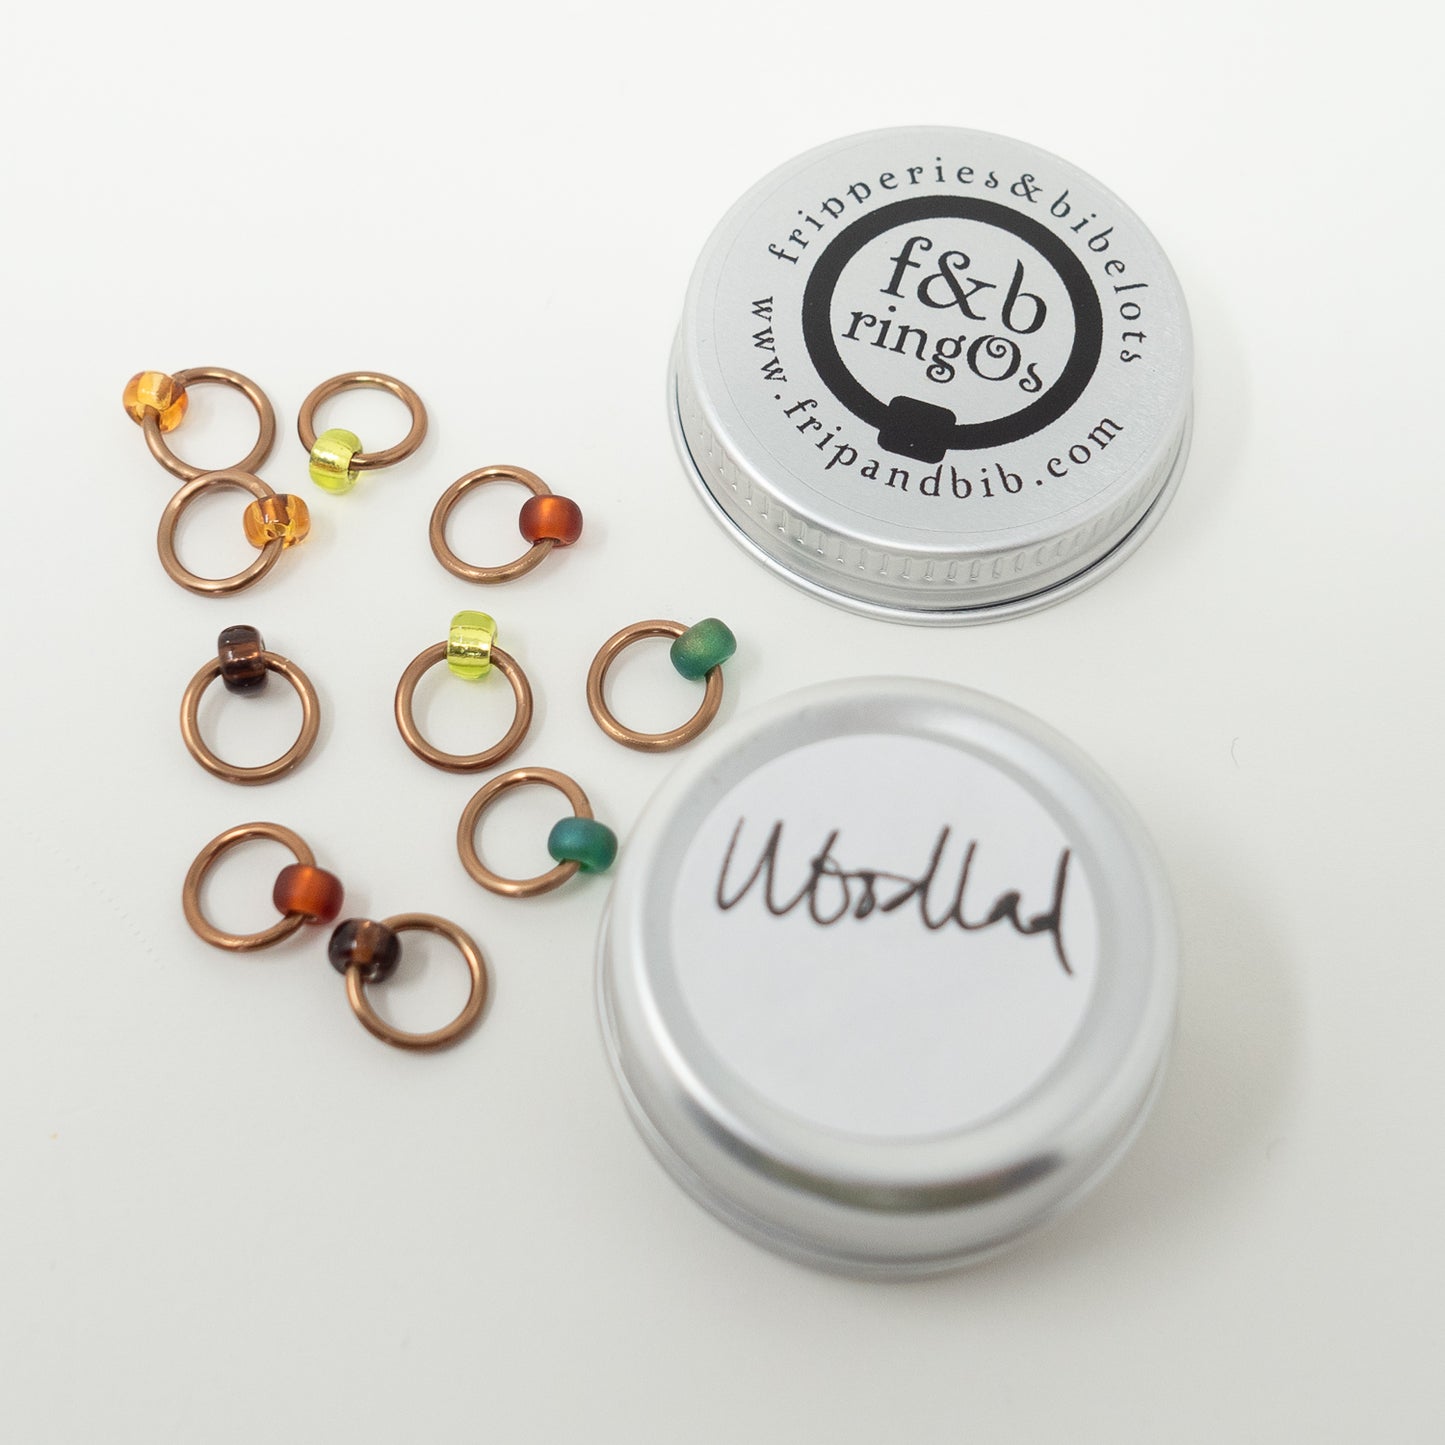 RingOs Stitch Markers by Fripperies & Bibelots